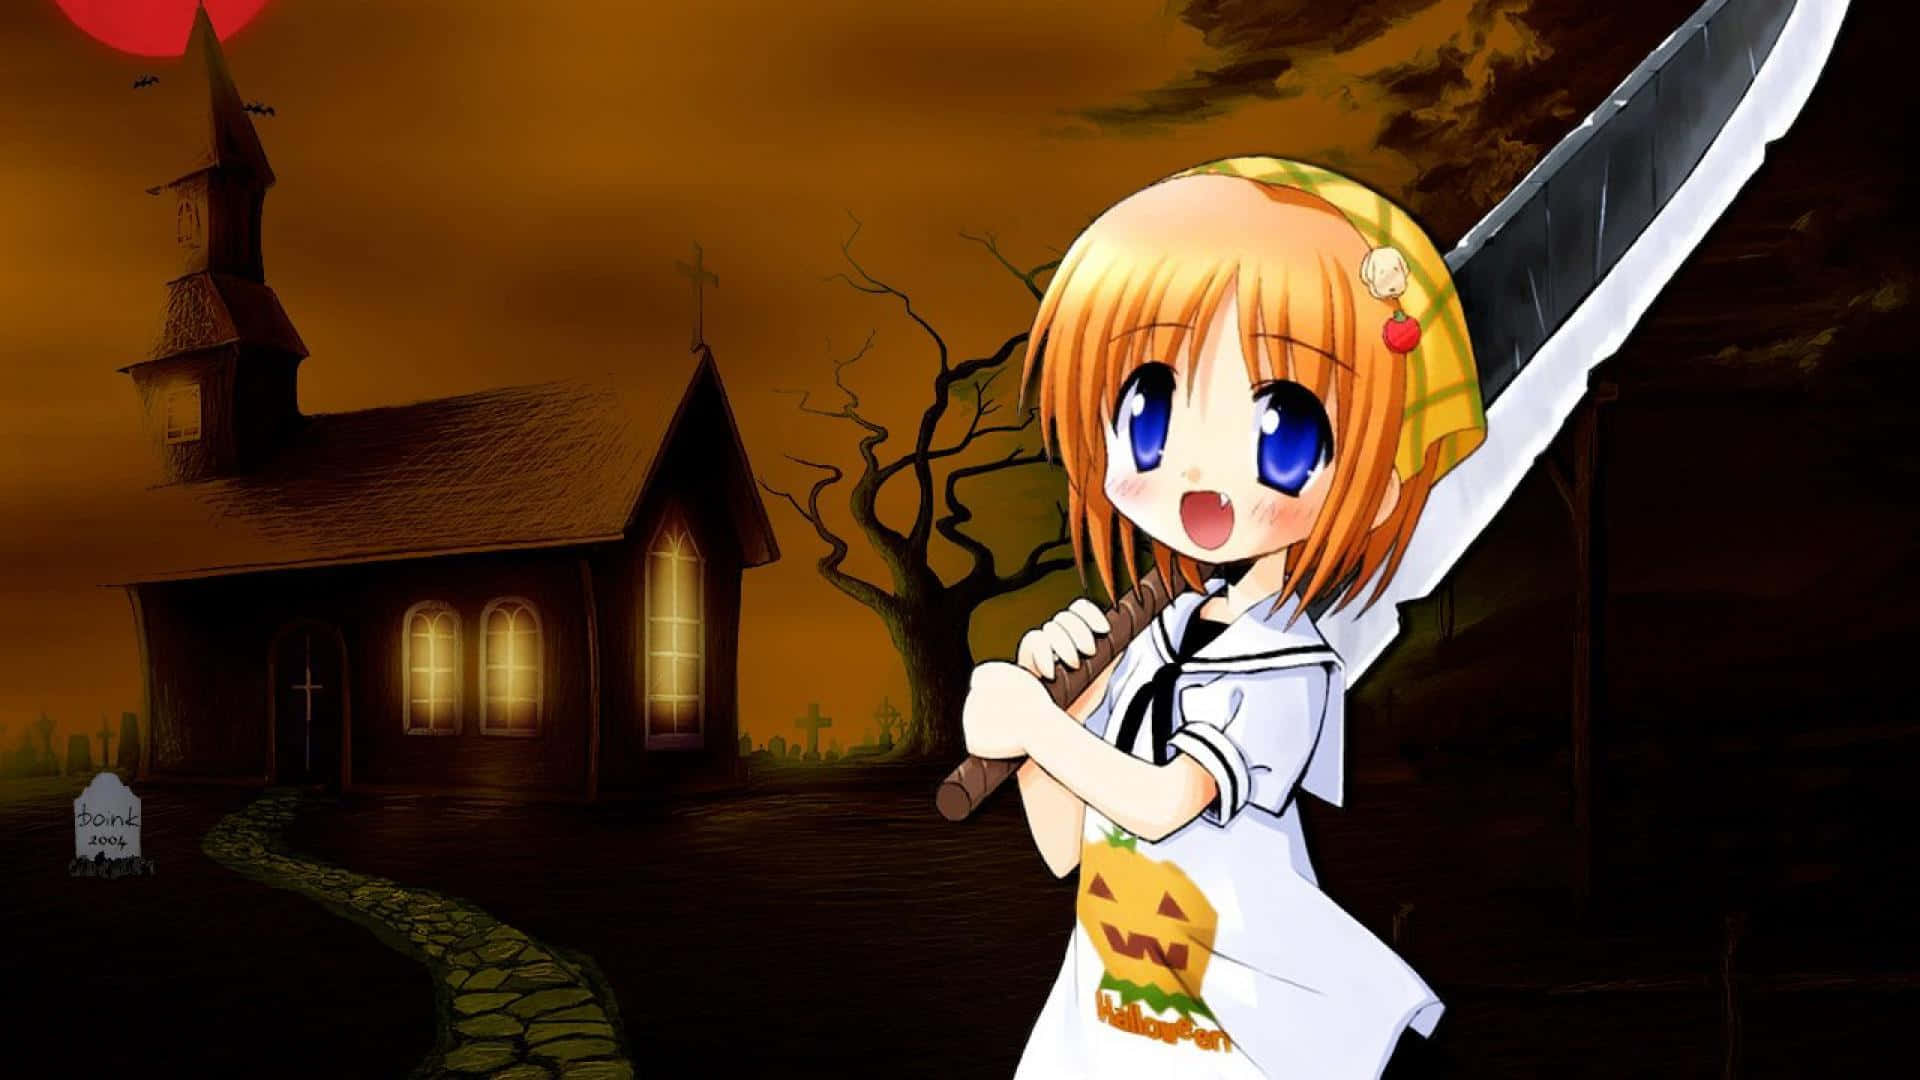 Halloween Anime Girl Cast Spells with Her Magical Book Wallpaper